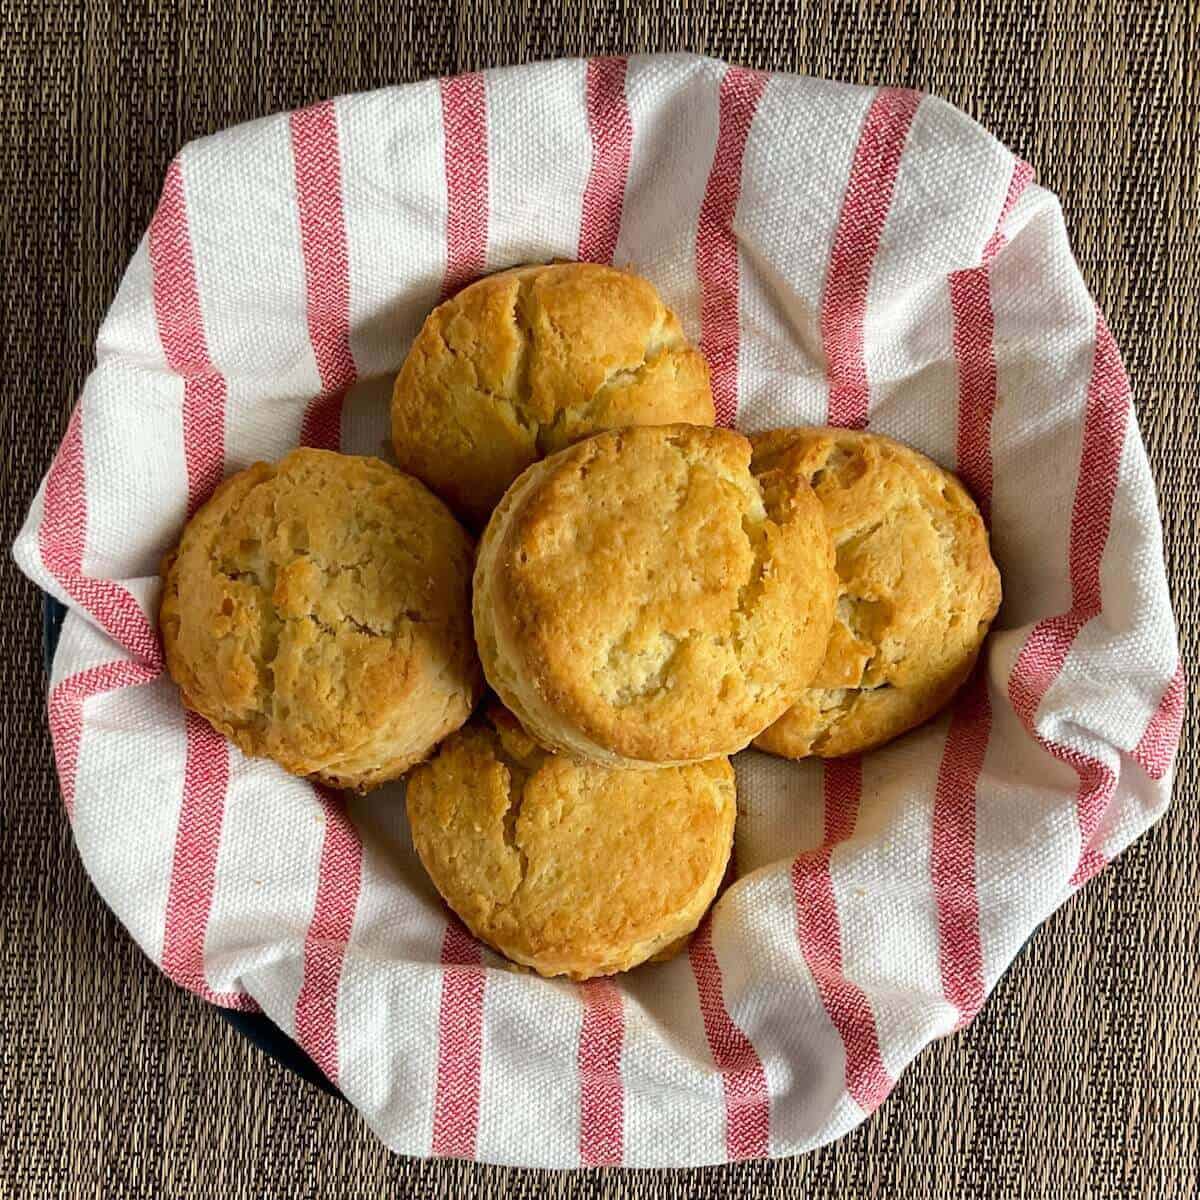 Biscuits stacked on a red & white striped towel nestled in a bowl from overhead.